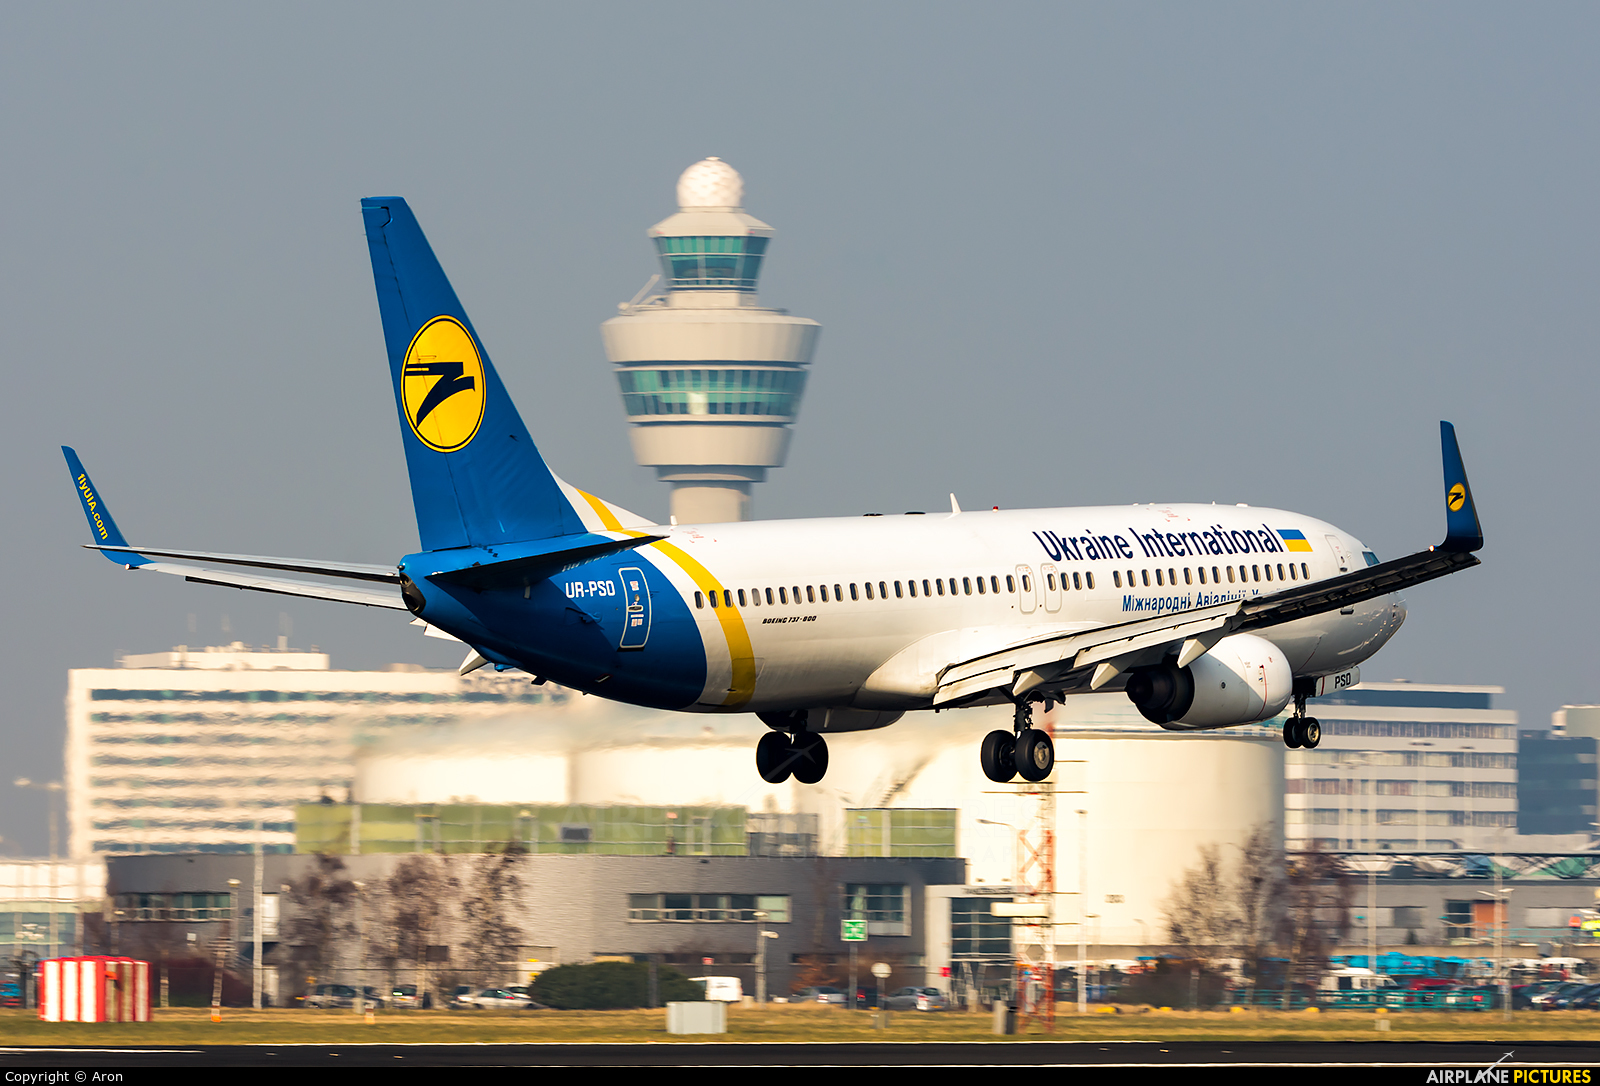 Ukraine National Airlines UR-PSO aircraft at Amsterdam - Schiphol